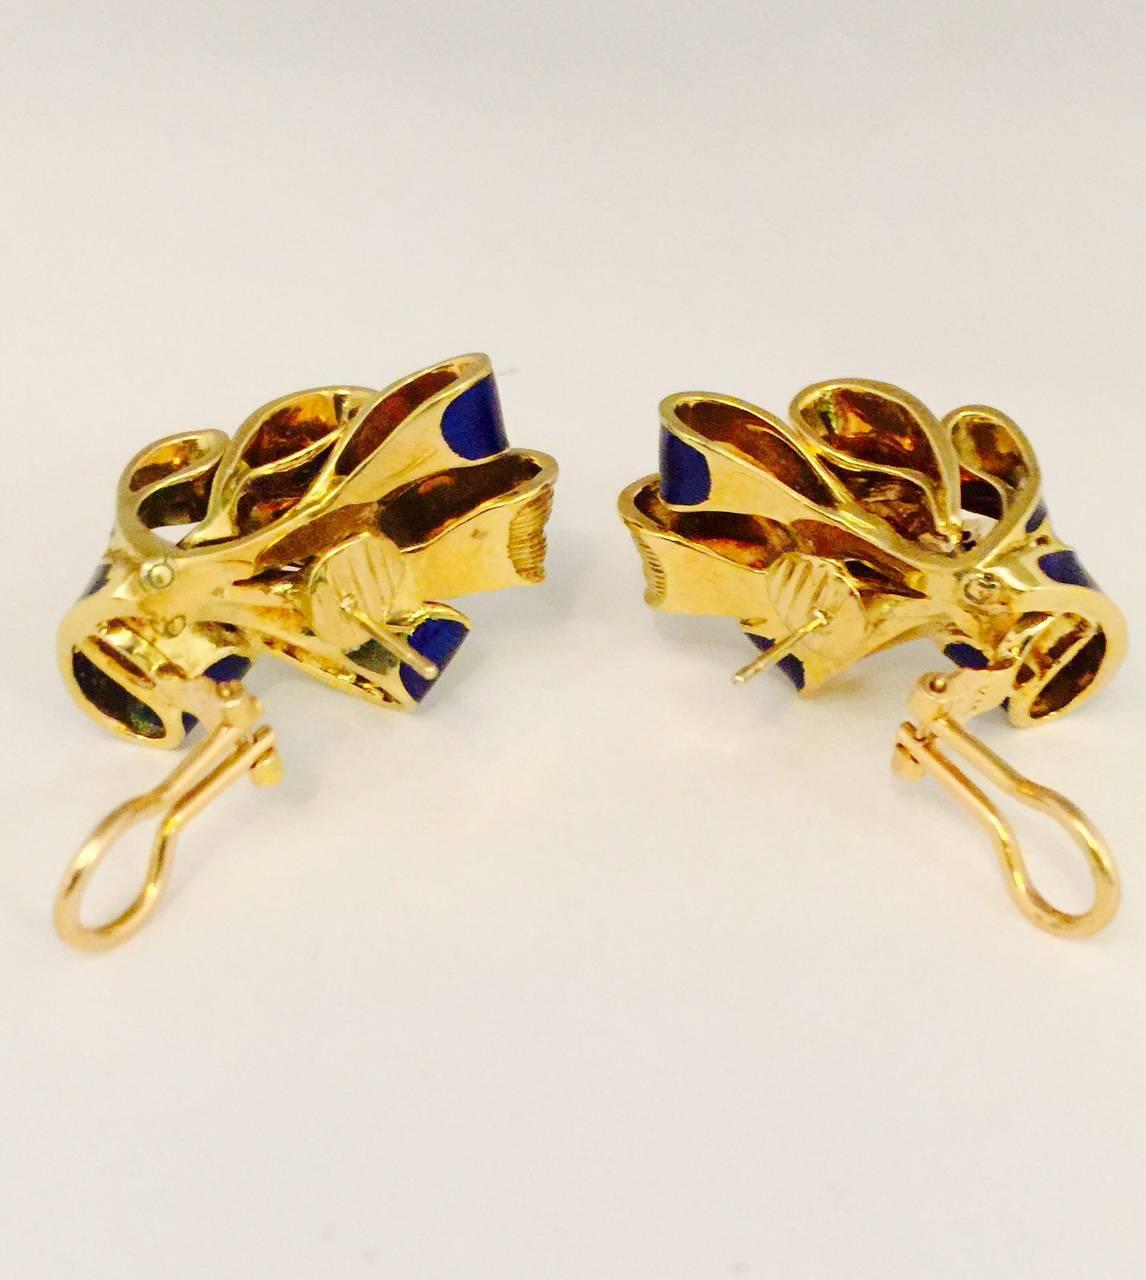 Every woman loves Tiffany!  They are recognized world wide as leaders in the fine jewelry industry.  These fabulous 18 karat yellow gold pierced earrings feature Paillone enamel in the richest blue color possible.  Omega backs supply added security.